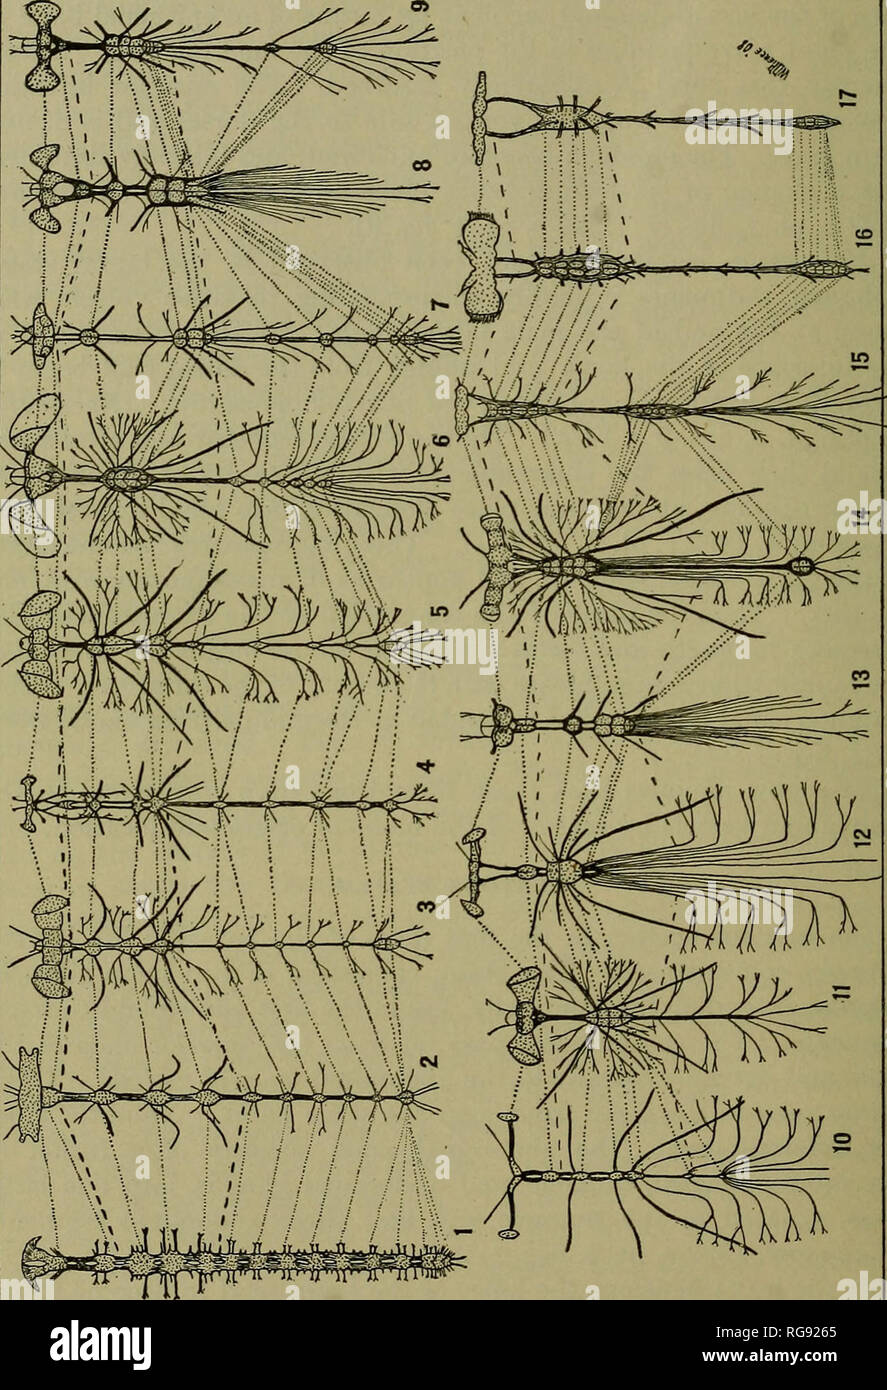 . Bulletin - United States National Museum. Science. 60 BULLETIN 66, UNITED STATES NATIONAL MUSEUM.. Fig.2.—Diagram comparing nervous system of strepsiptera &quot;with'that of other orders. 1. Machilis maritima. 5. Empis stercorea. 9. Syrphus ribesii. 13. Melolontha vulgaris. 2. Termes, species. 6. Tabanus bovinus. 10. Lucanus dama. 14. Stylops melittx. 3. Chironomus plumosus. 7. Formica rufa. 11. Sarcophaga carnaria. 15-17. Xenos vesparum. 4. Melanoplus spretus. 8. Acilius sulcatus. 12. Lachnosternafusca. (These figures are borrowed from Packard, Brauer, and Nassonow and for detailed informat Stock Photo